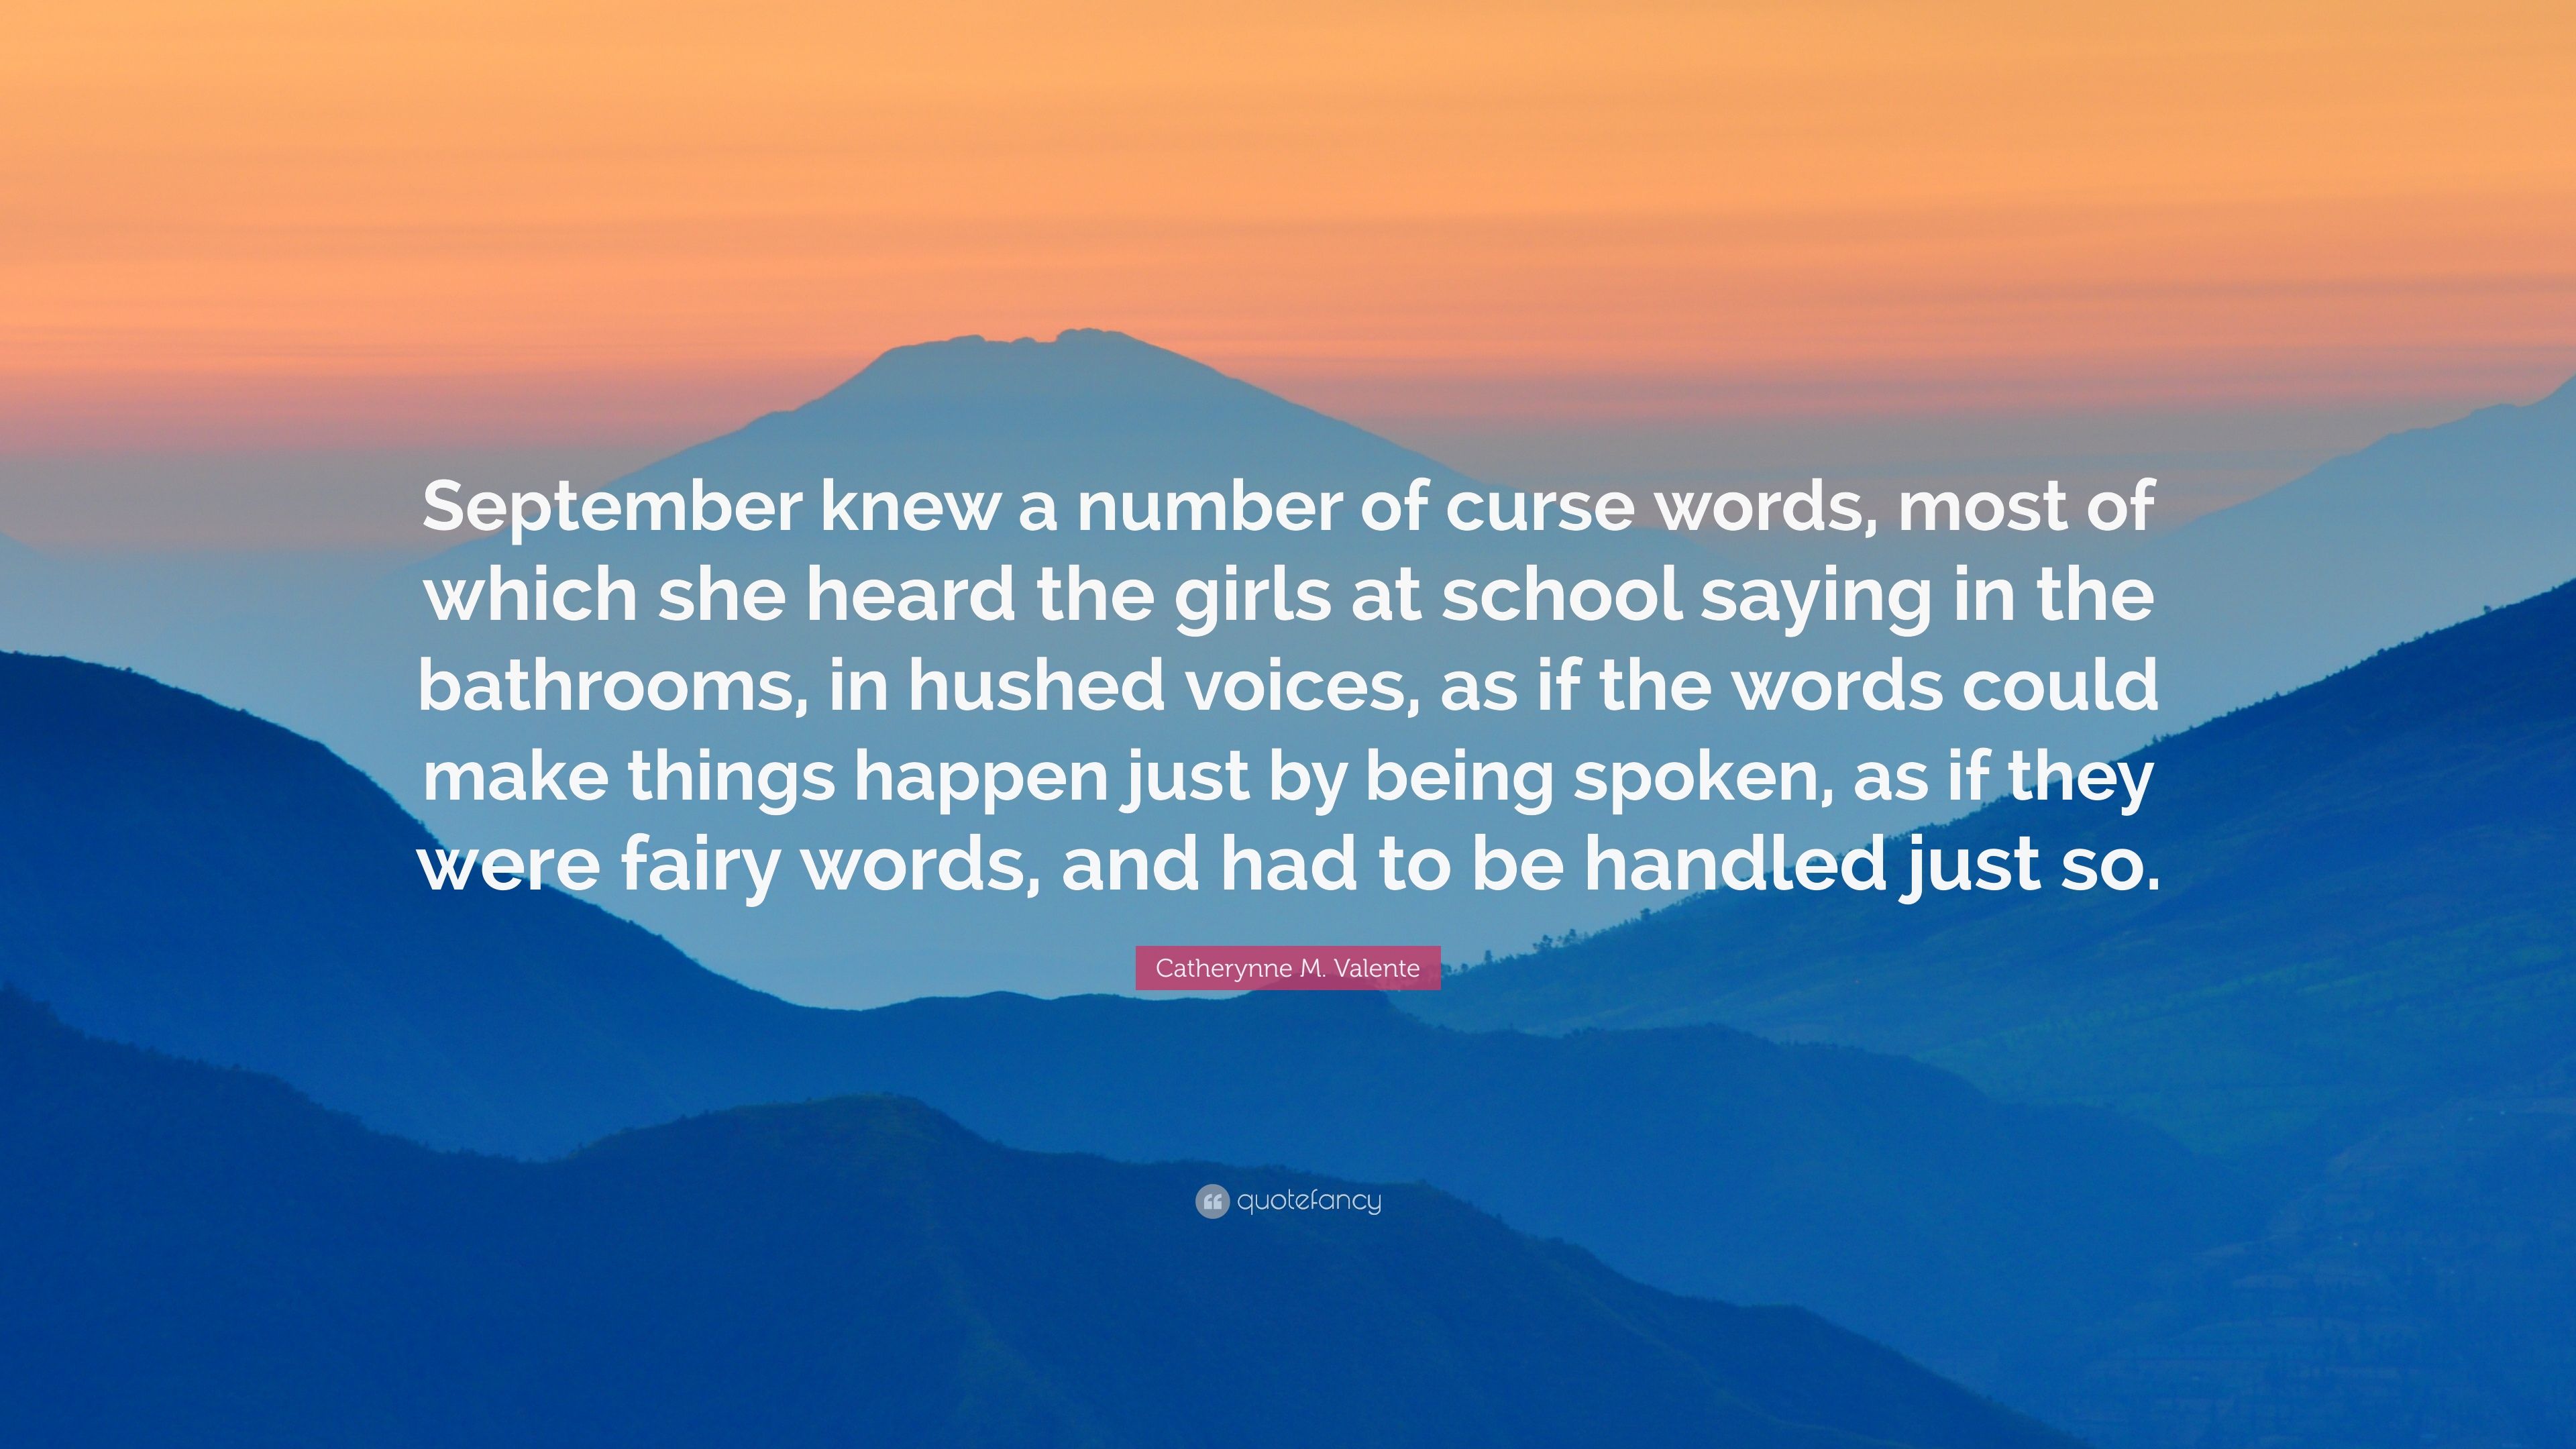 Catherynne M. Valente Quote: “September knew a number of curse